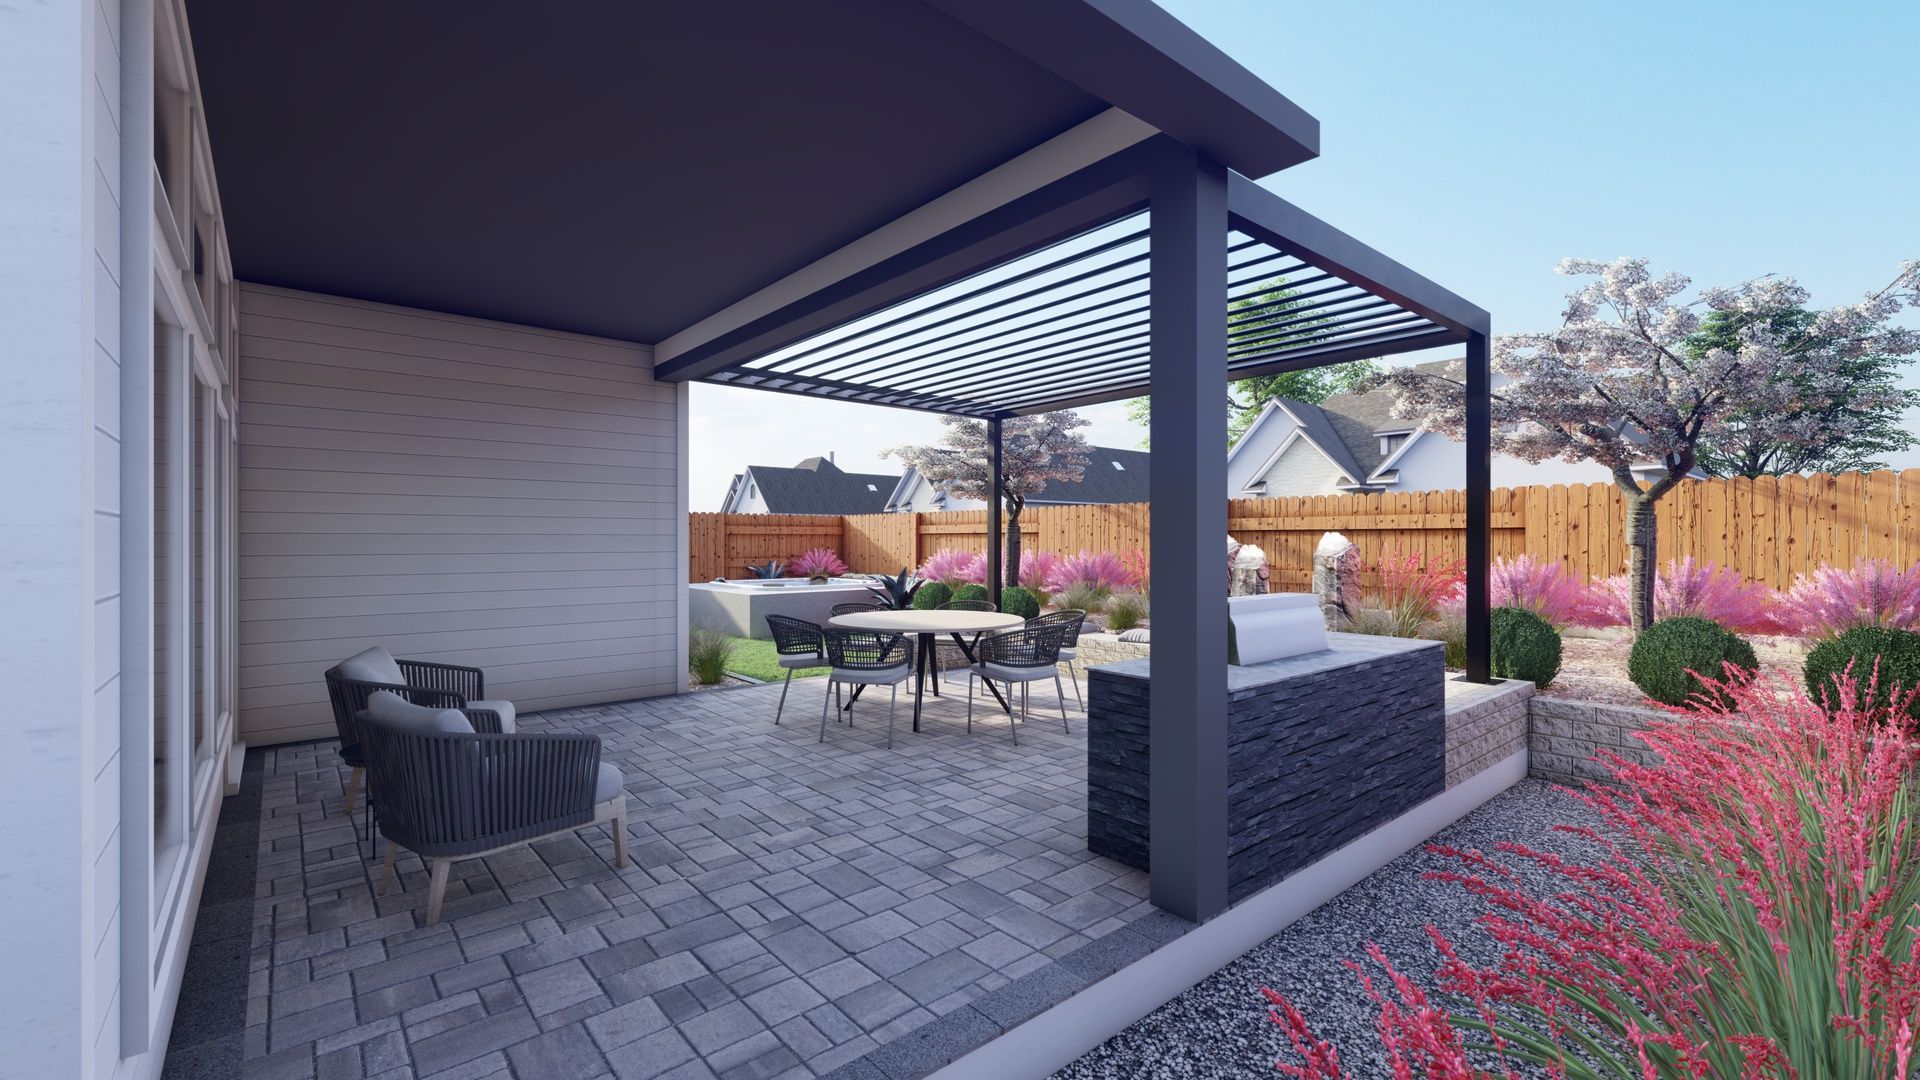 a stone patio with a steel pergola overhead and an outdoor grilling area with colorful flowers and trees. A large privacy fence borders the baackyard